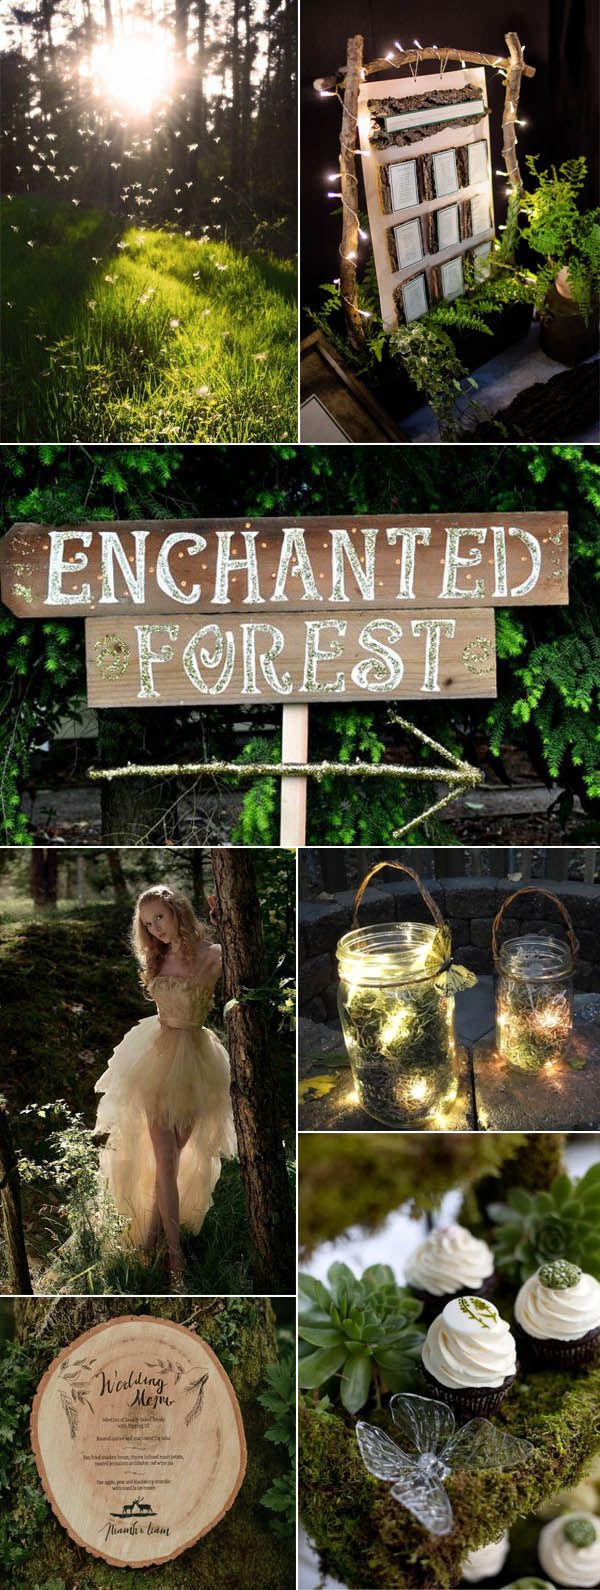 Magical Fairy Tale Wedding in The Woods